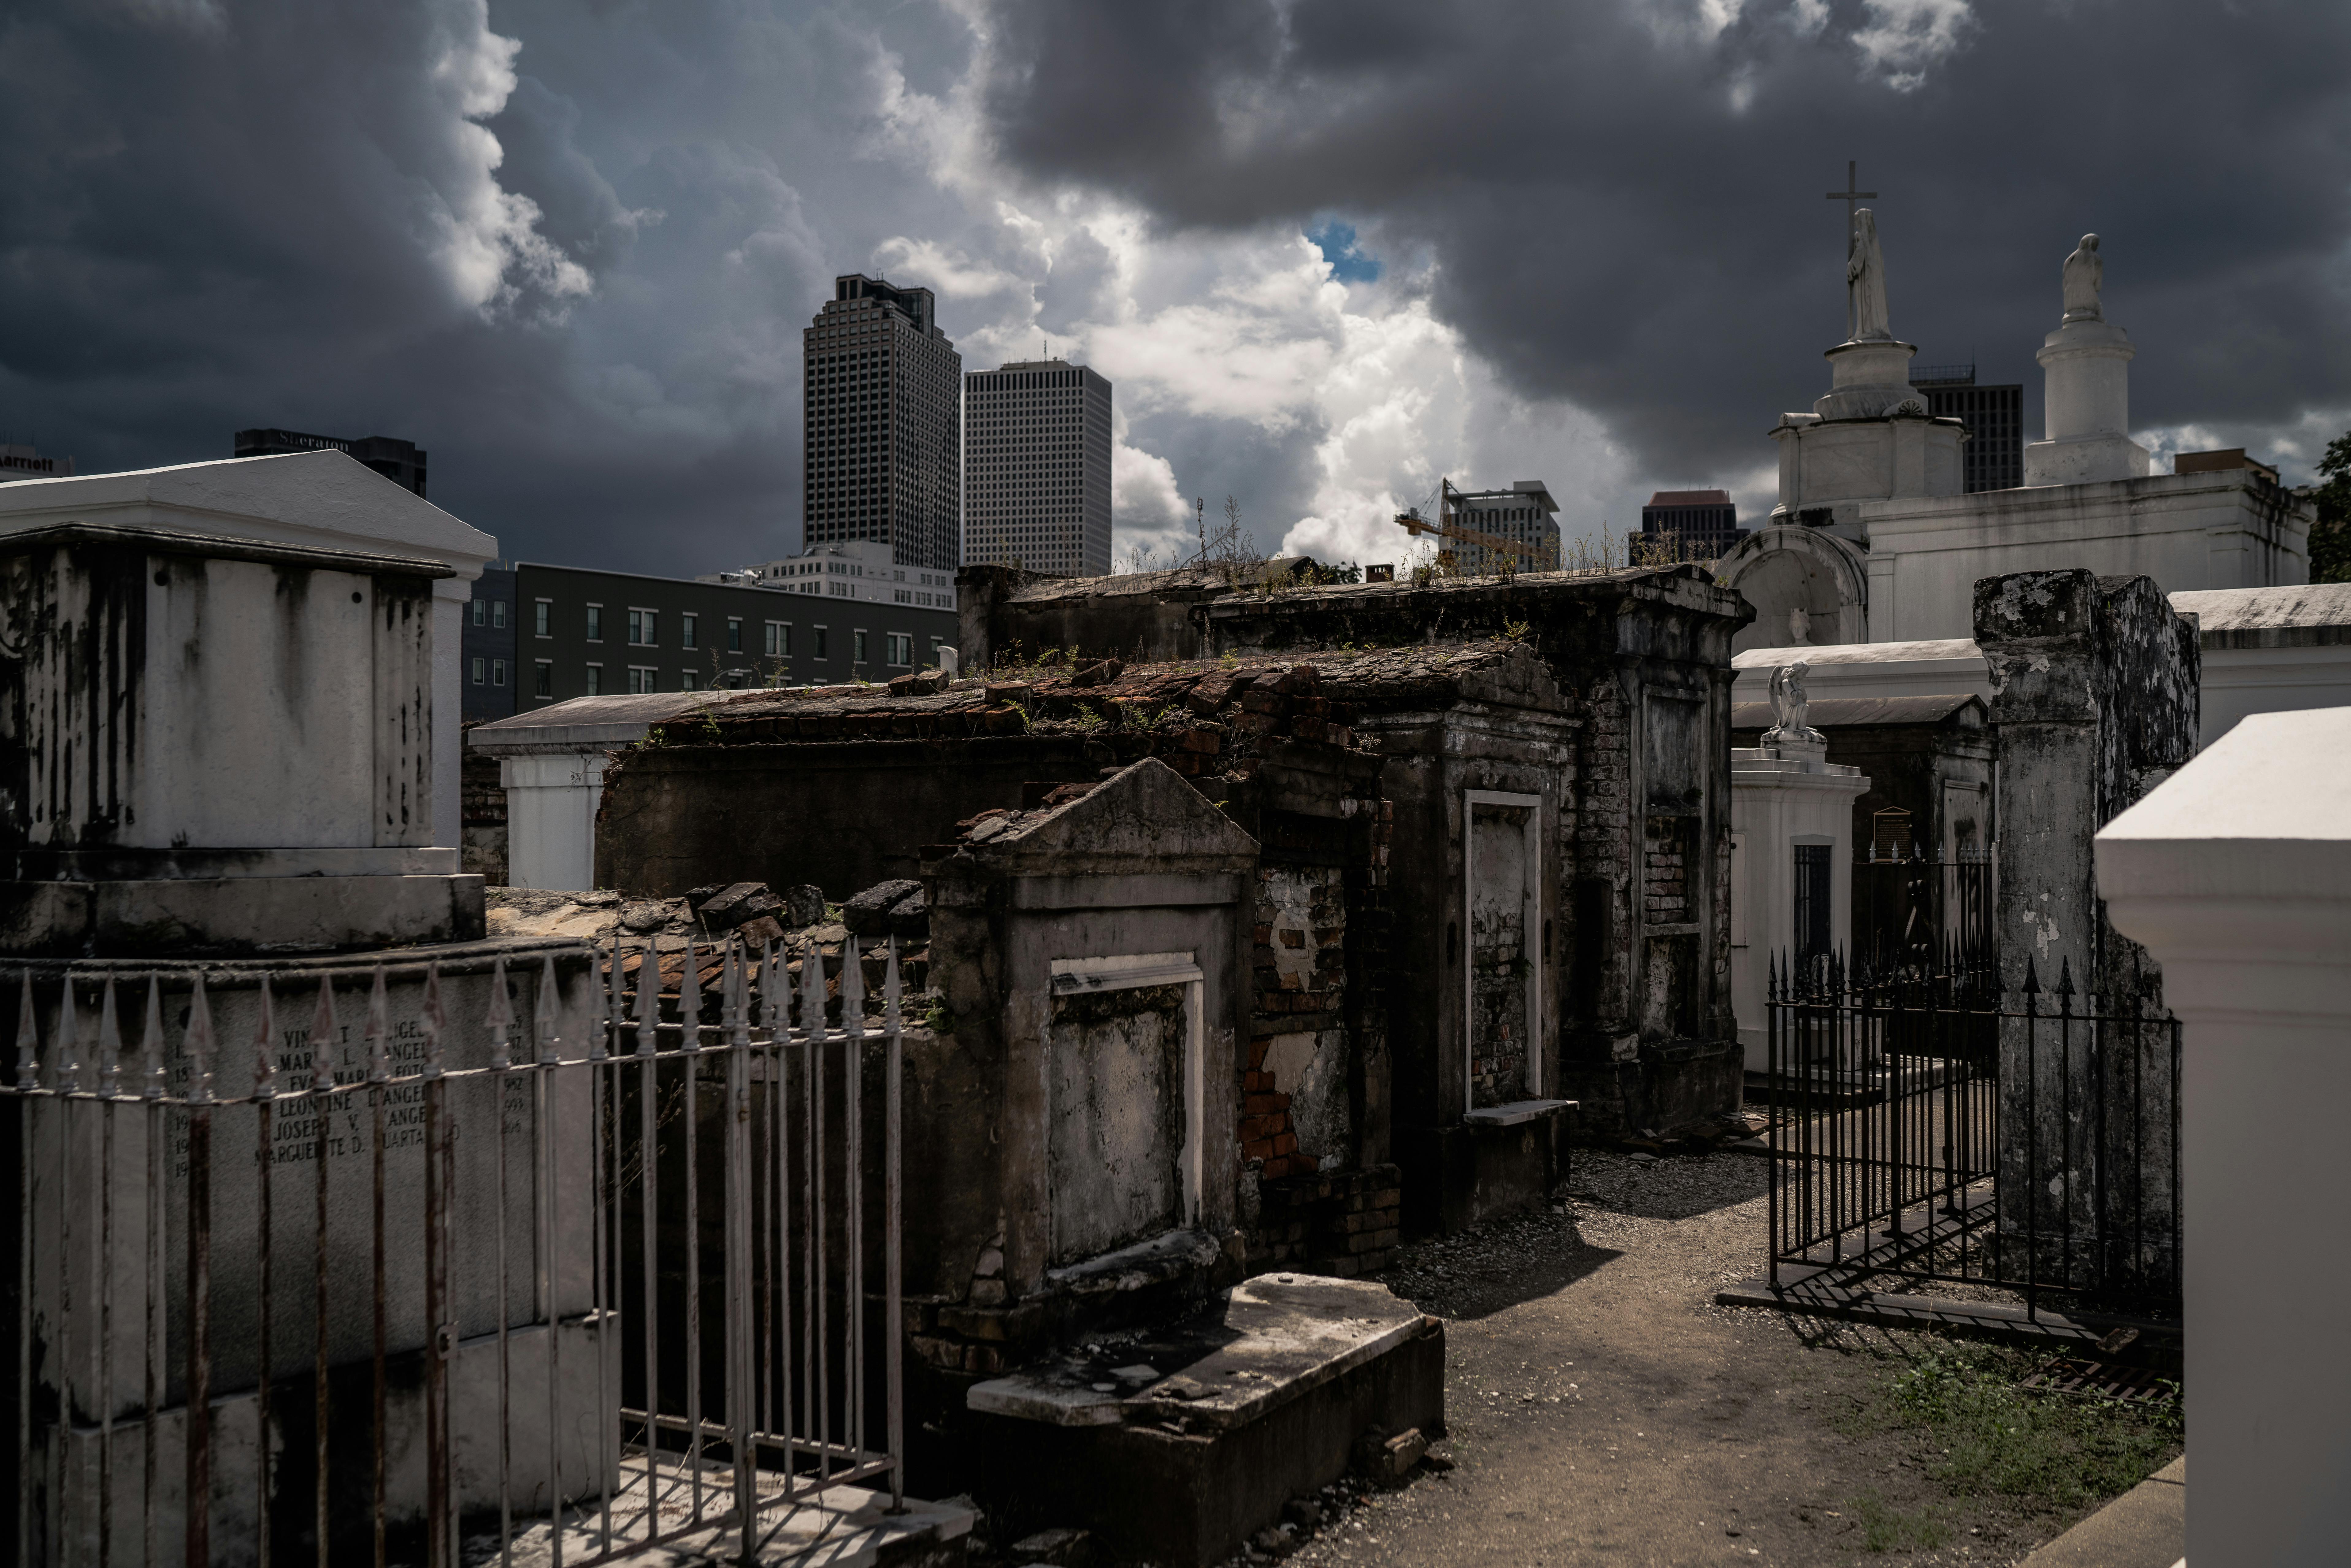 The New Orleans haunted cemetery city bus tour